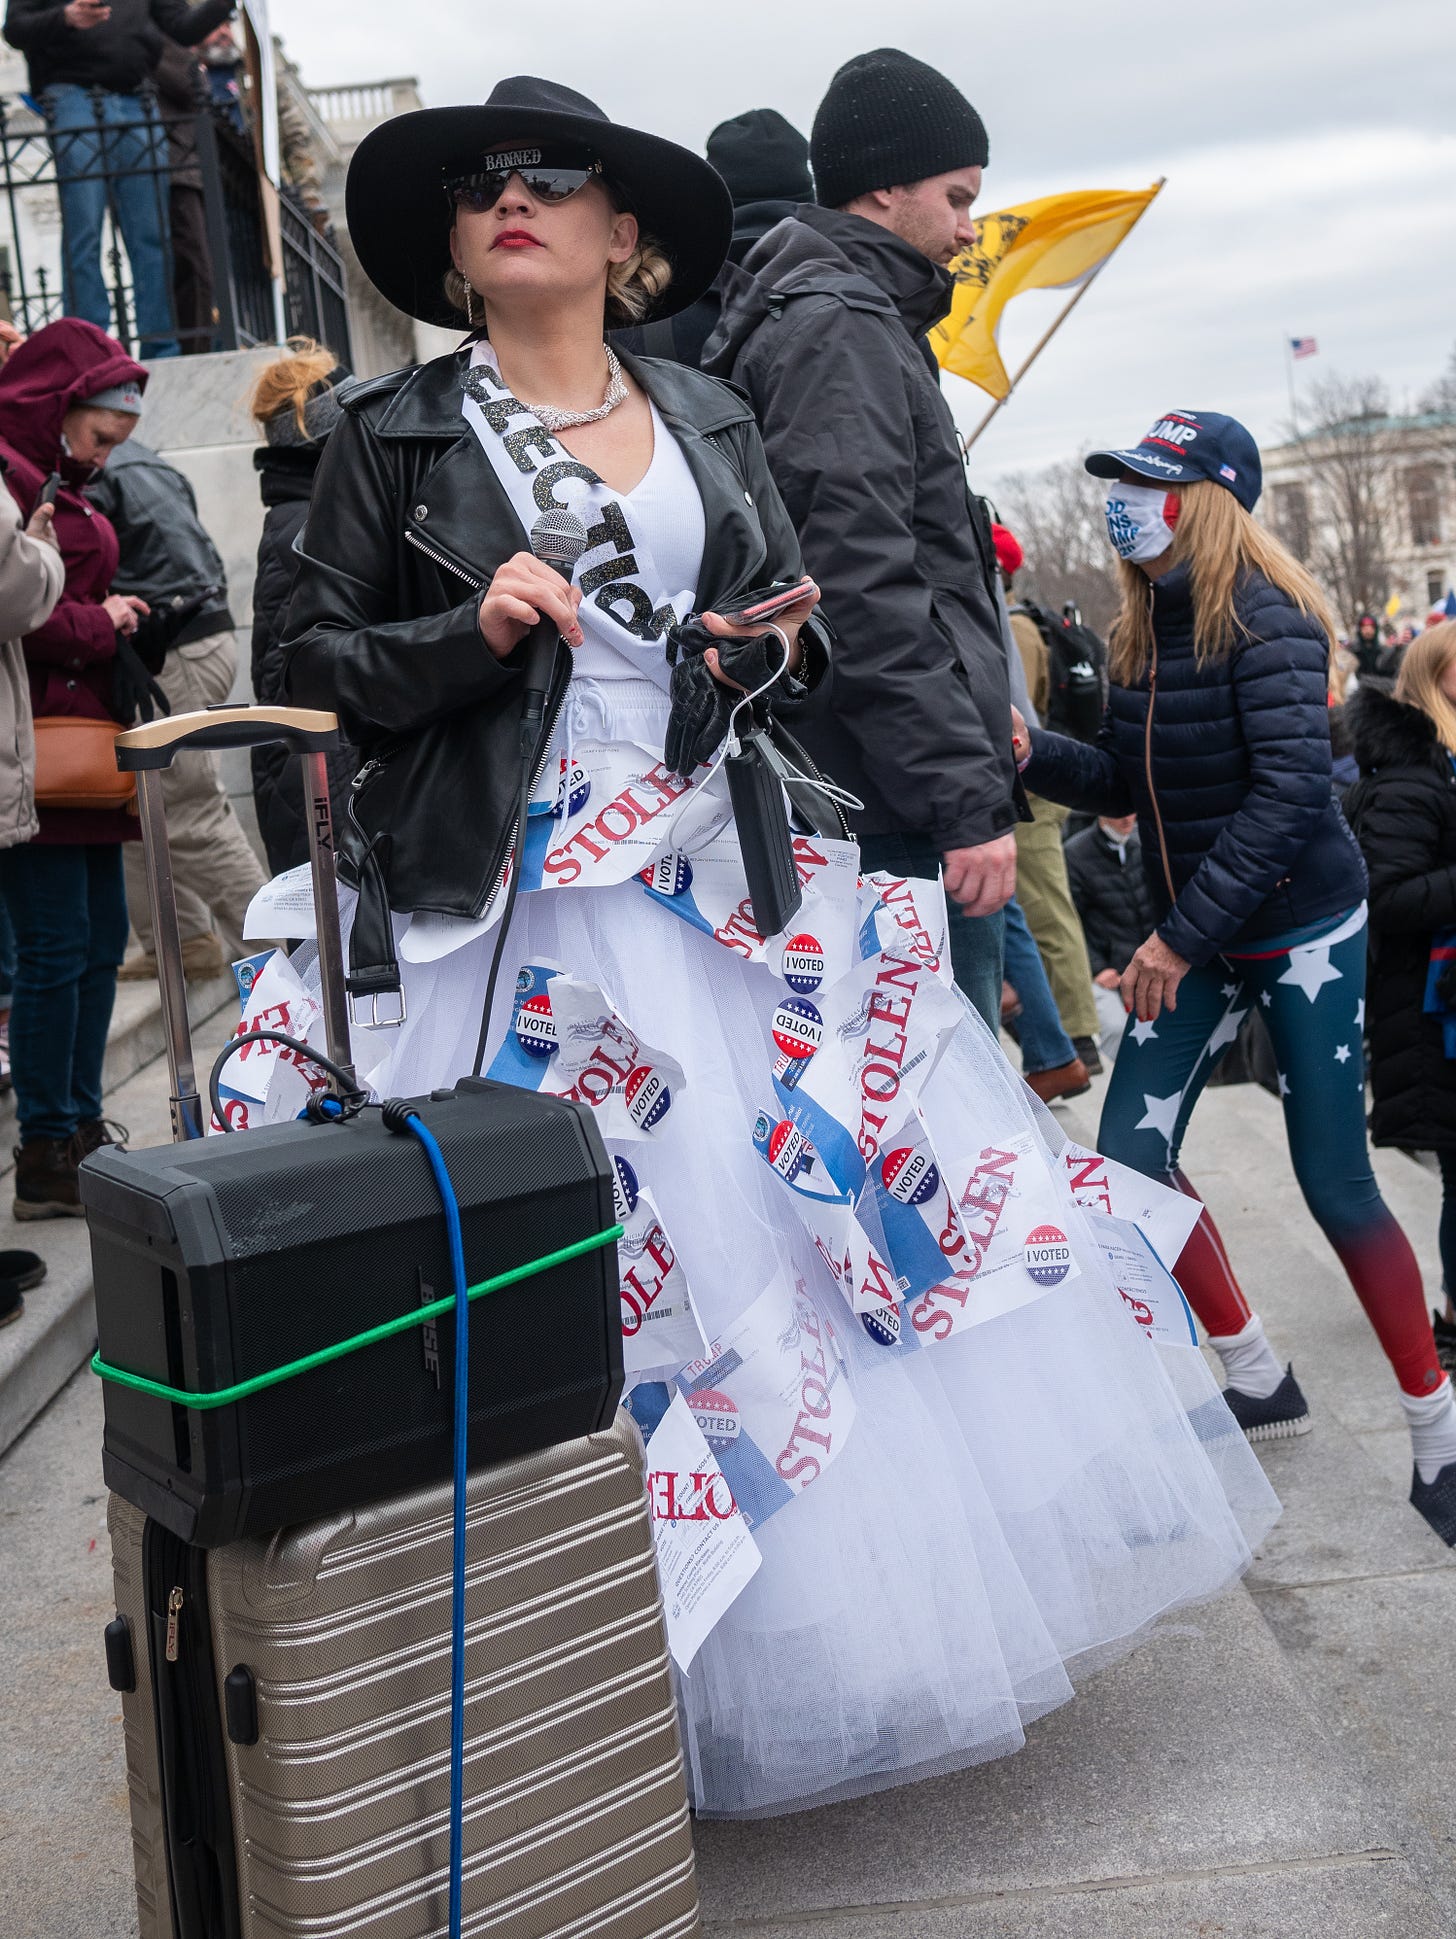 A young woman stands on the steps of the US Capitol on Jan 6, 2021 with an improvised speaker system (a bootbox sized speaker bungied to the top of hard-sided silver carry on luggage). The woman is wearing a long white dress with a big chiffonlike poofy skirt. She is wearing a black leather jacket, wide-brimmed black hat, dark oversized sunglasses, and red lipstick. Blonde curls spill from beneath the hat. She wears a white sash with the word "ELECTION" on it. From the waist down, pieces of paper with the word "STOLEN" in red are affixed to the dress, along with red, white and blue "I VOTED" buttons. She is holding a microphone in her right hand and a phone with a batter bank in her left hand, as if she is preparing to read. She gazes off into the disance as people walk behind her.